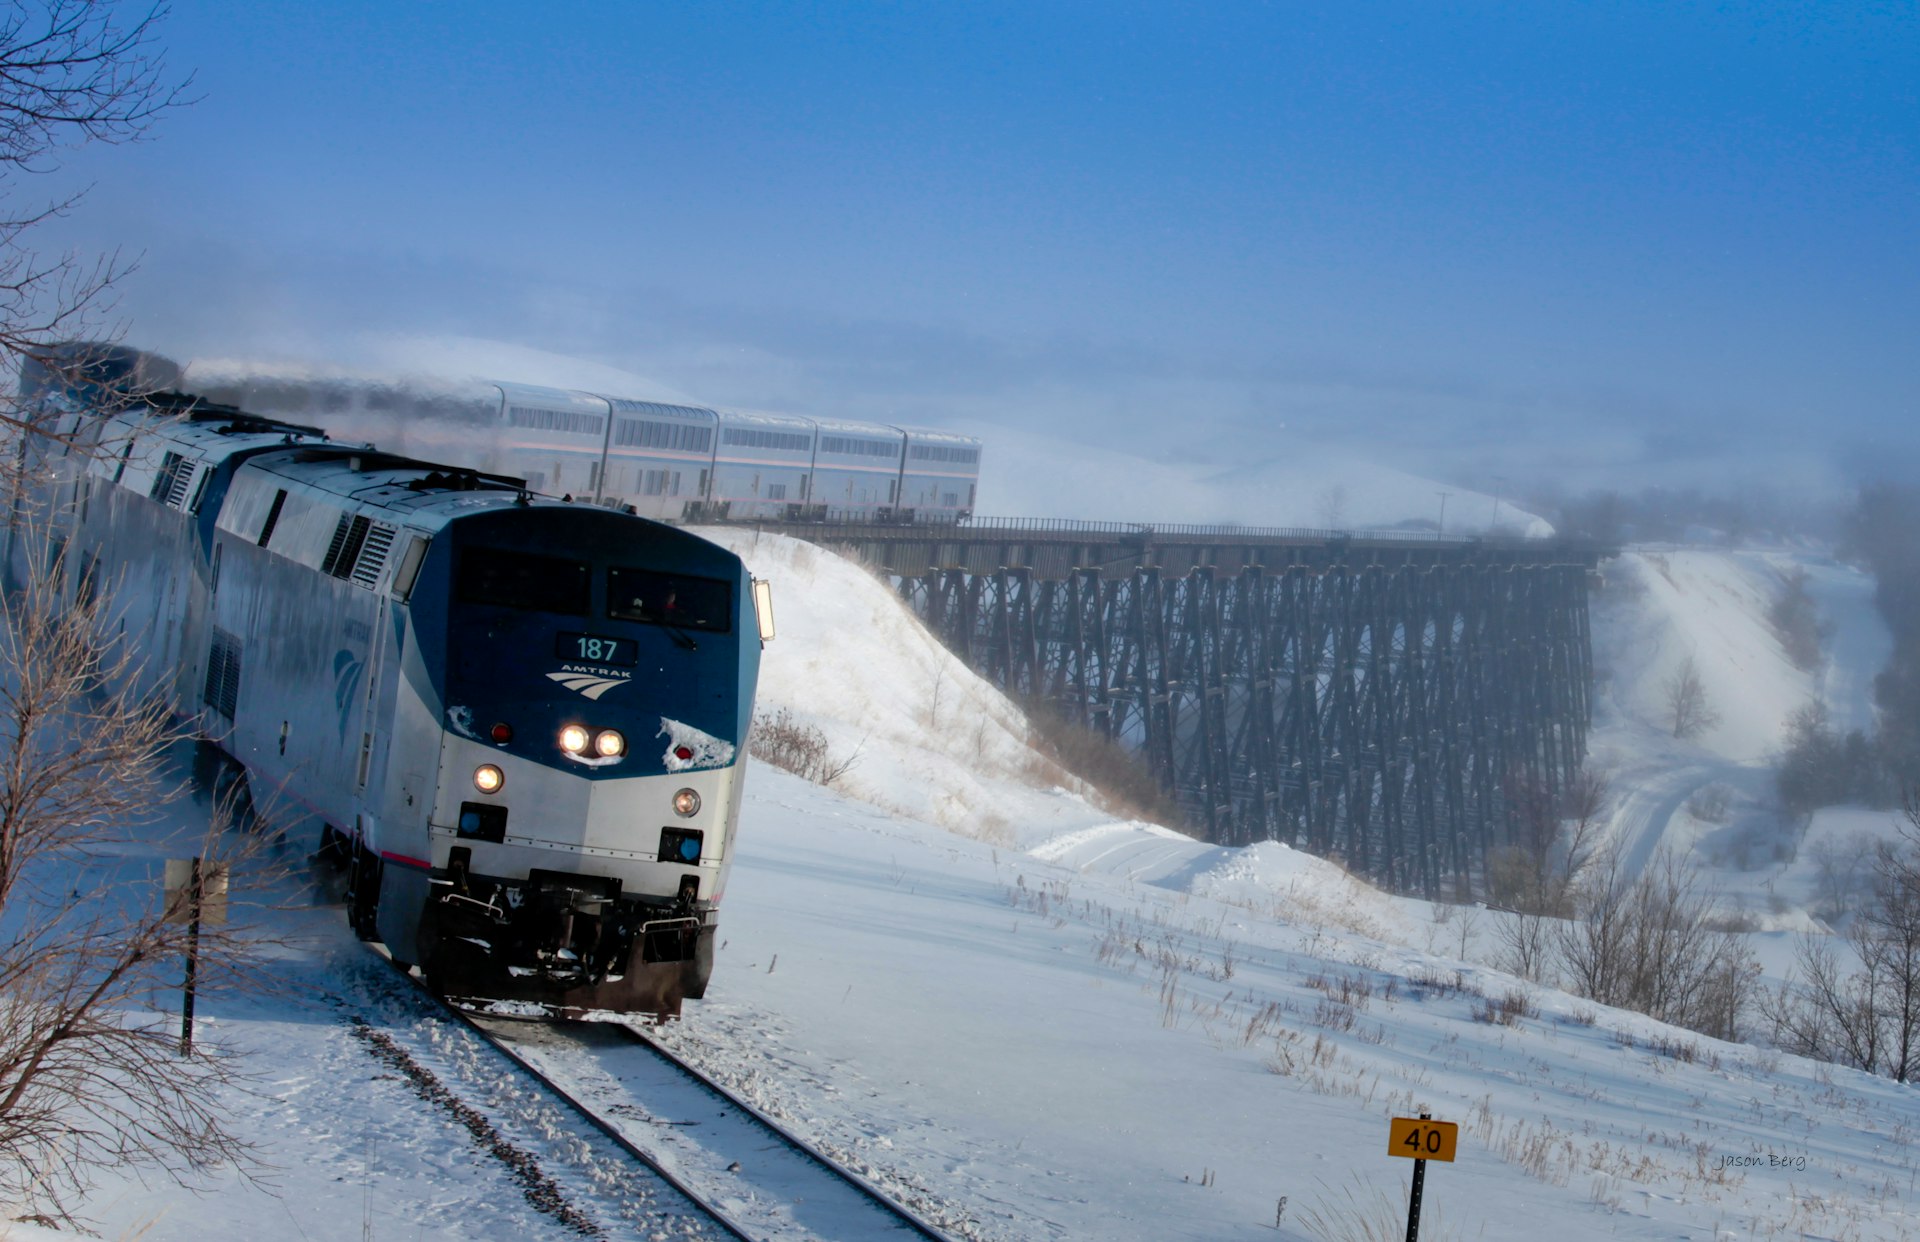 A large train coming over a trestle bridge in heavy snow